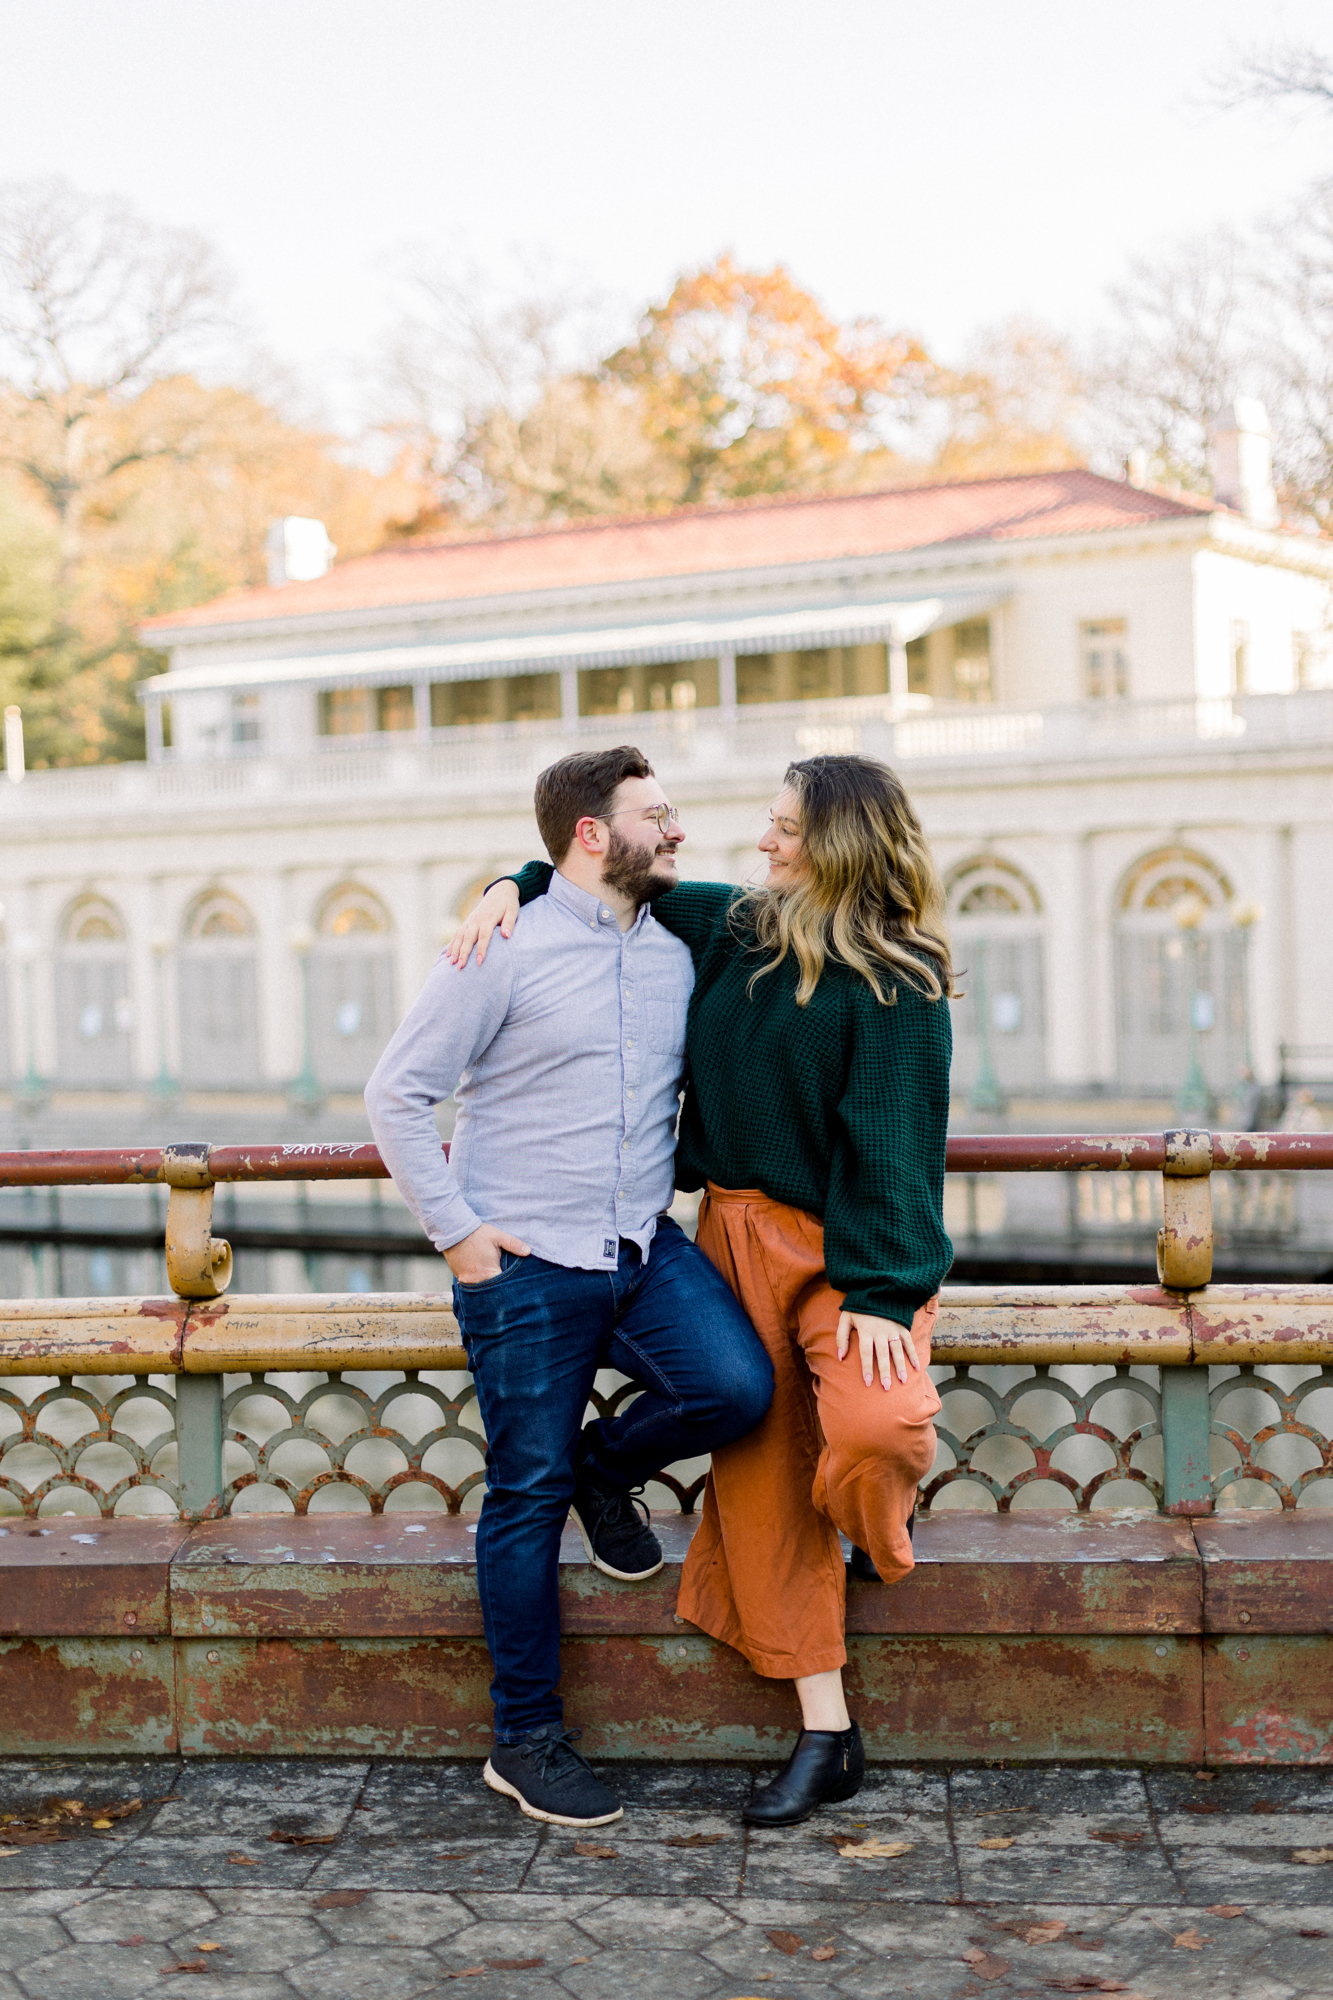 Jaw-dropping NYC Engagement photo locations and ideas